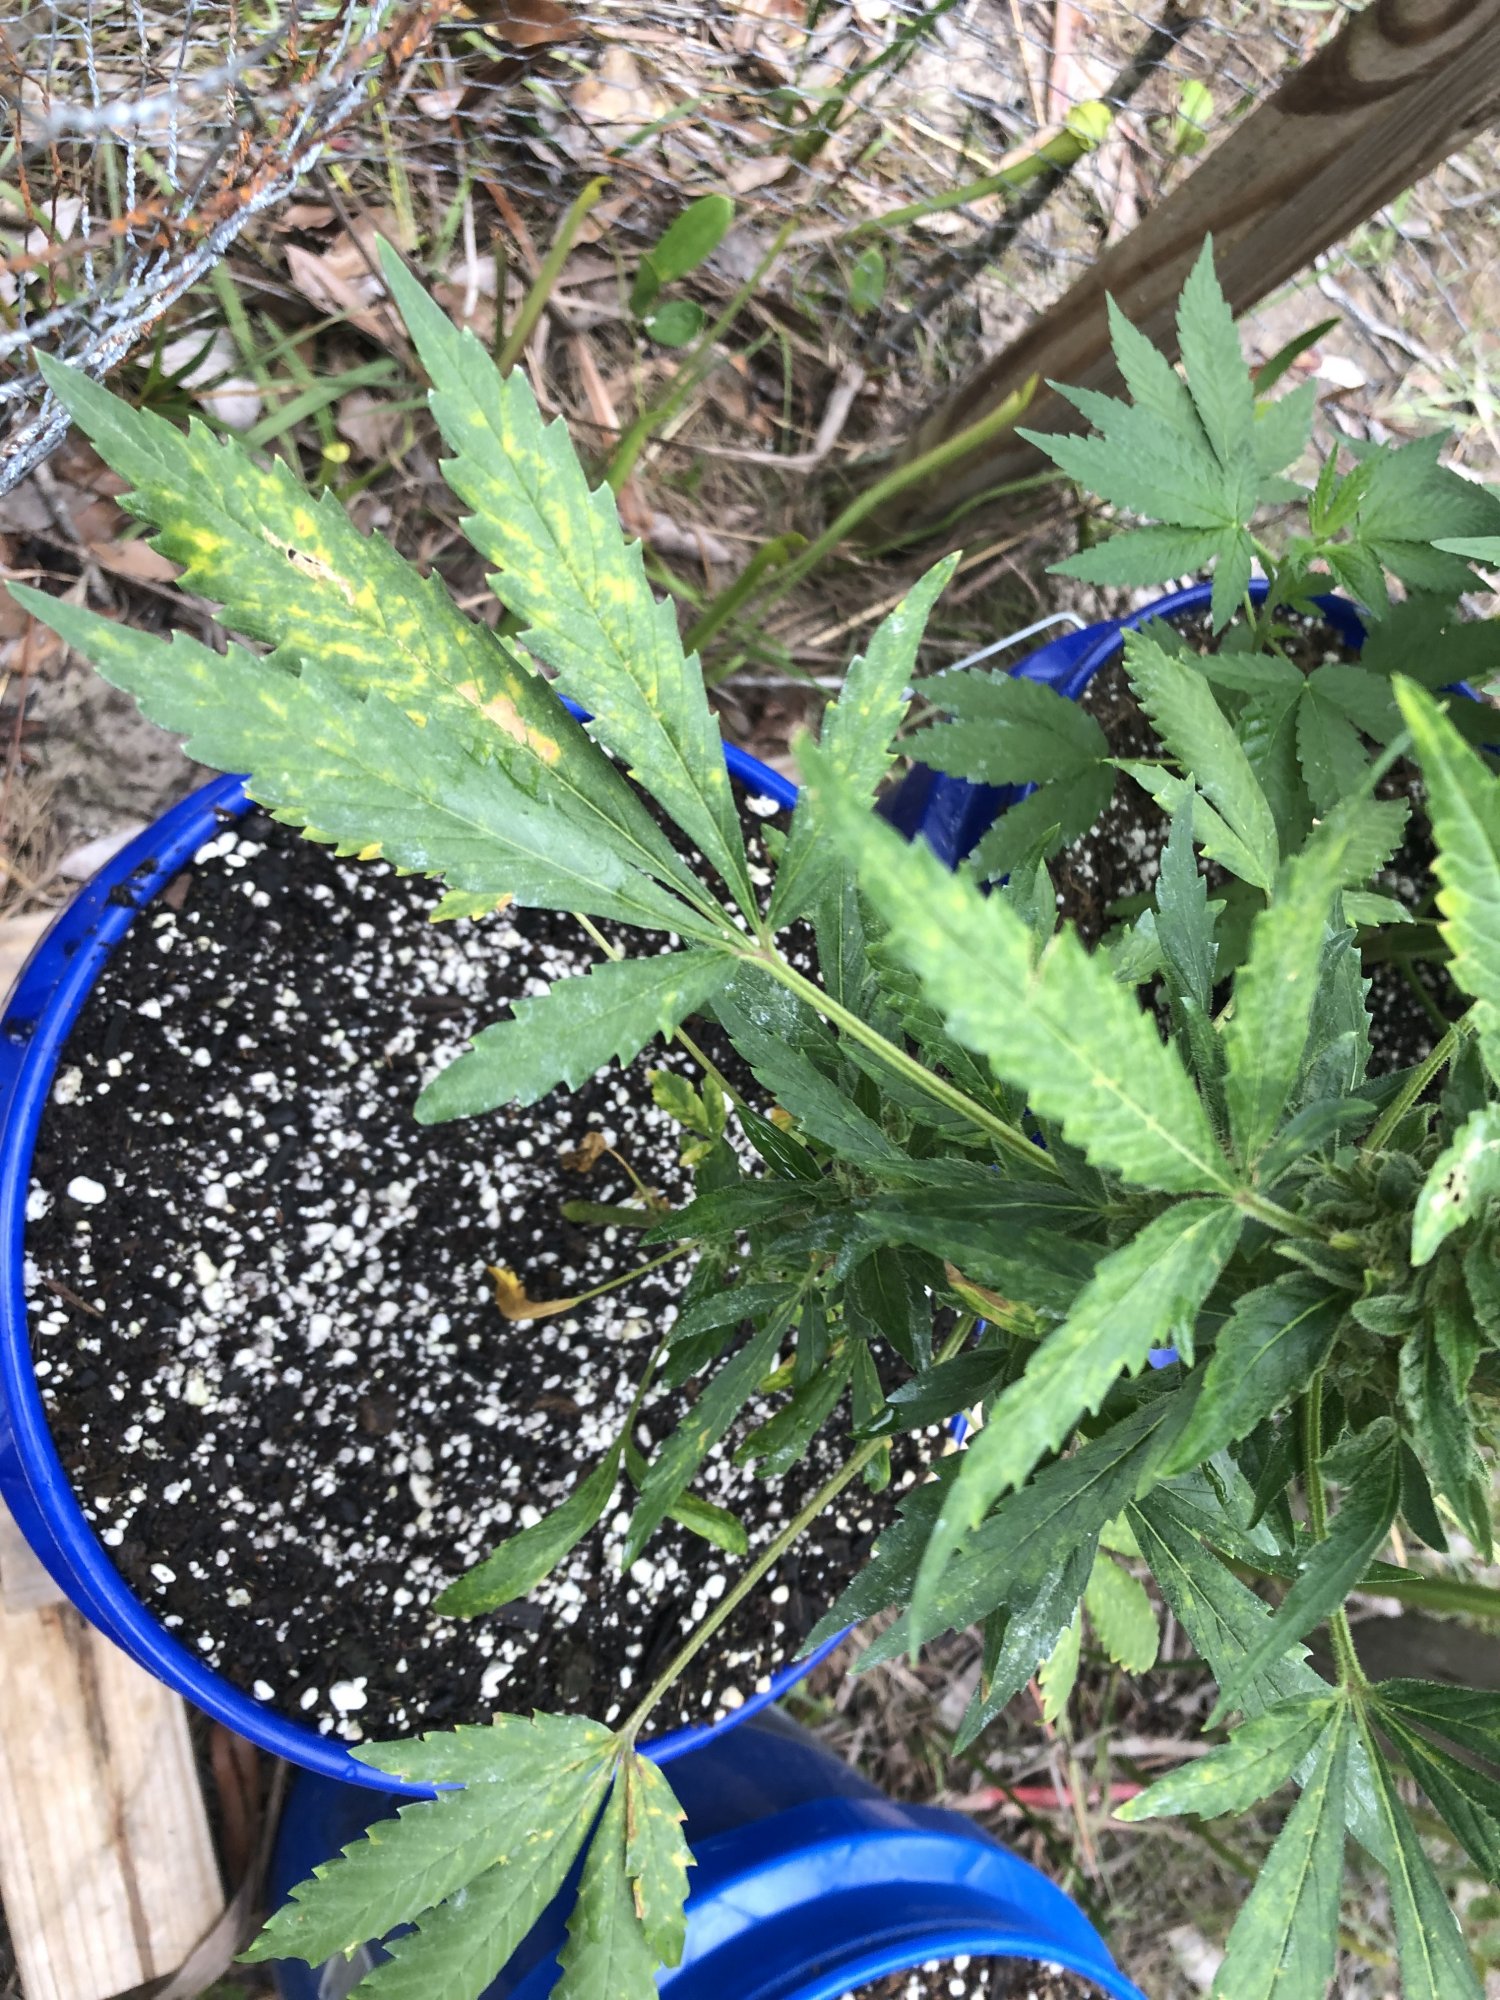 Whats happening to my plant